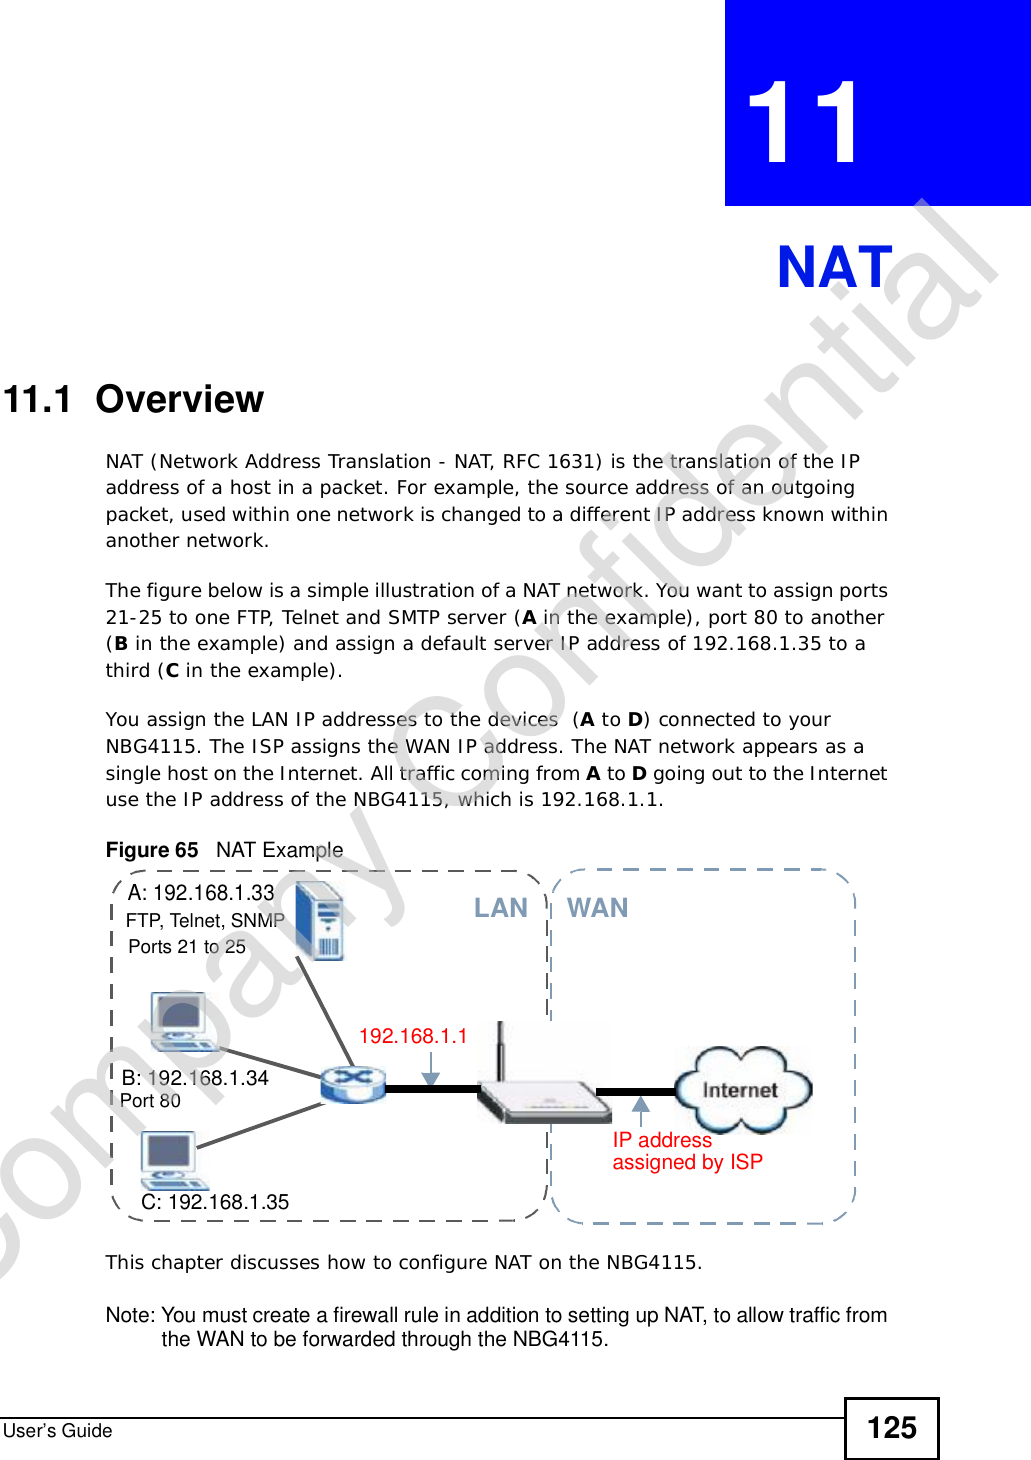 User’s Guide 125CHAPTER 11 NAT11.1  Overview   NAT (Network Address Translation - NAT, RFC 1631) is the translation of the IP address of a host in a packet. For example, the source address of an outgoing packet, used within one network is changed to a different IP address known within another network.The figure below is a simple illustration of a NAT network. You want to assign ports 21-25 to one FTP, Telnet and SMTP server (A in the example), port 80 to another (B in the example) and assign a default server IP address of 192.168.1.35 to a third (C in the example). You assign the LAN IP addresses to the devices  (A to D) connected to your NBG4115. The ISP assigns the WAN IP address. The NAT network appears as a single host on the Internet. All traffic coming from A to D going out to the Internet use the IP address of the NBG4115, which is 192.168.1.1.Figure 65   NAT ExampleThis chapter discusses how to configure NAT on the NBG4115.Note: You must create a firewall rule in addition to setting up NAT, to allow traffic from the WAN to be forwarded through the NBG4115.A: 192.168.1.33B: 192.168.1.34C: 192.168.1.35IP address 192.168.1.1WANLANassigned by ISPFTP, Telnet, SNMPPort 80Ports 21 to 25Company Confidential